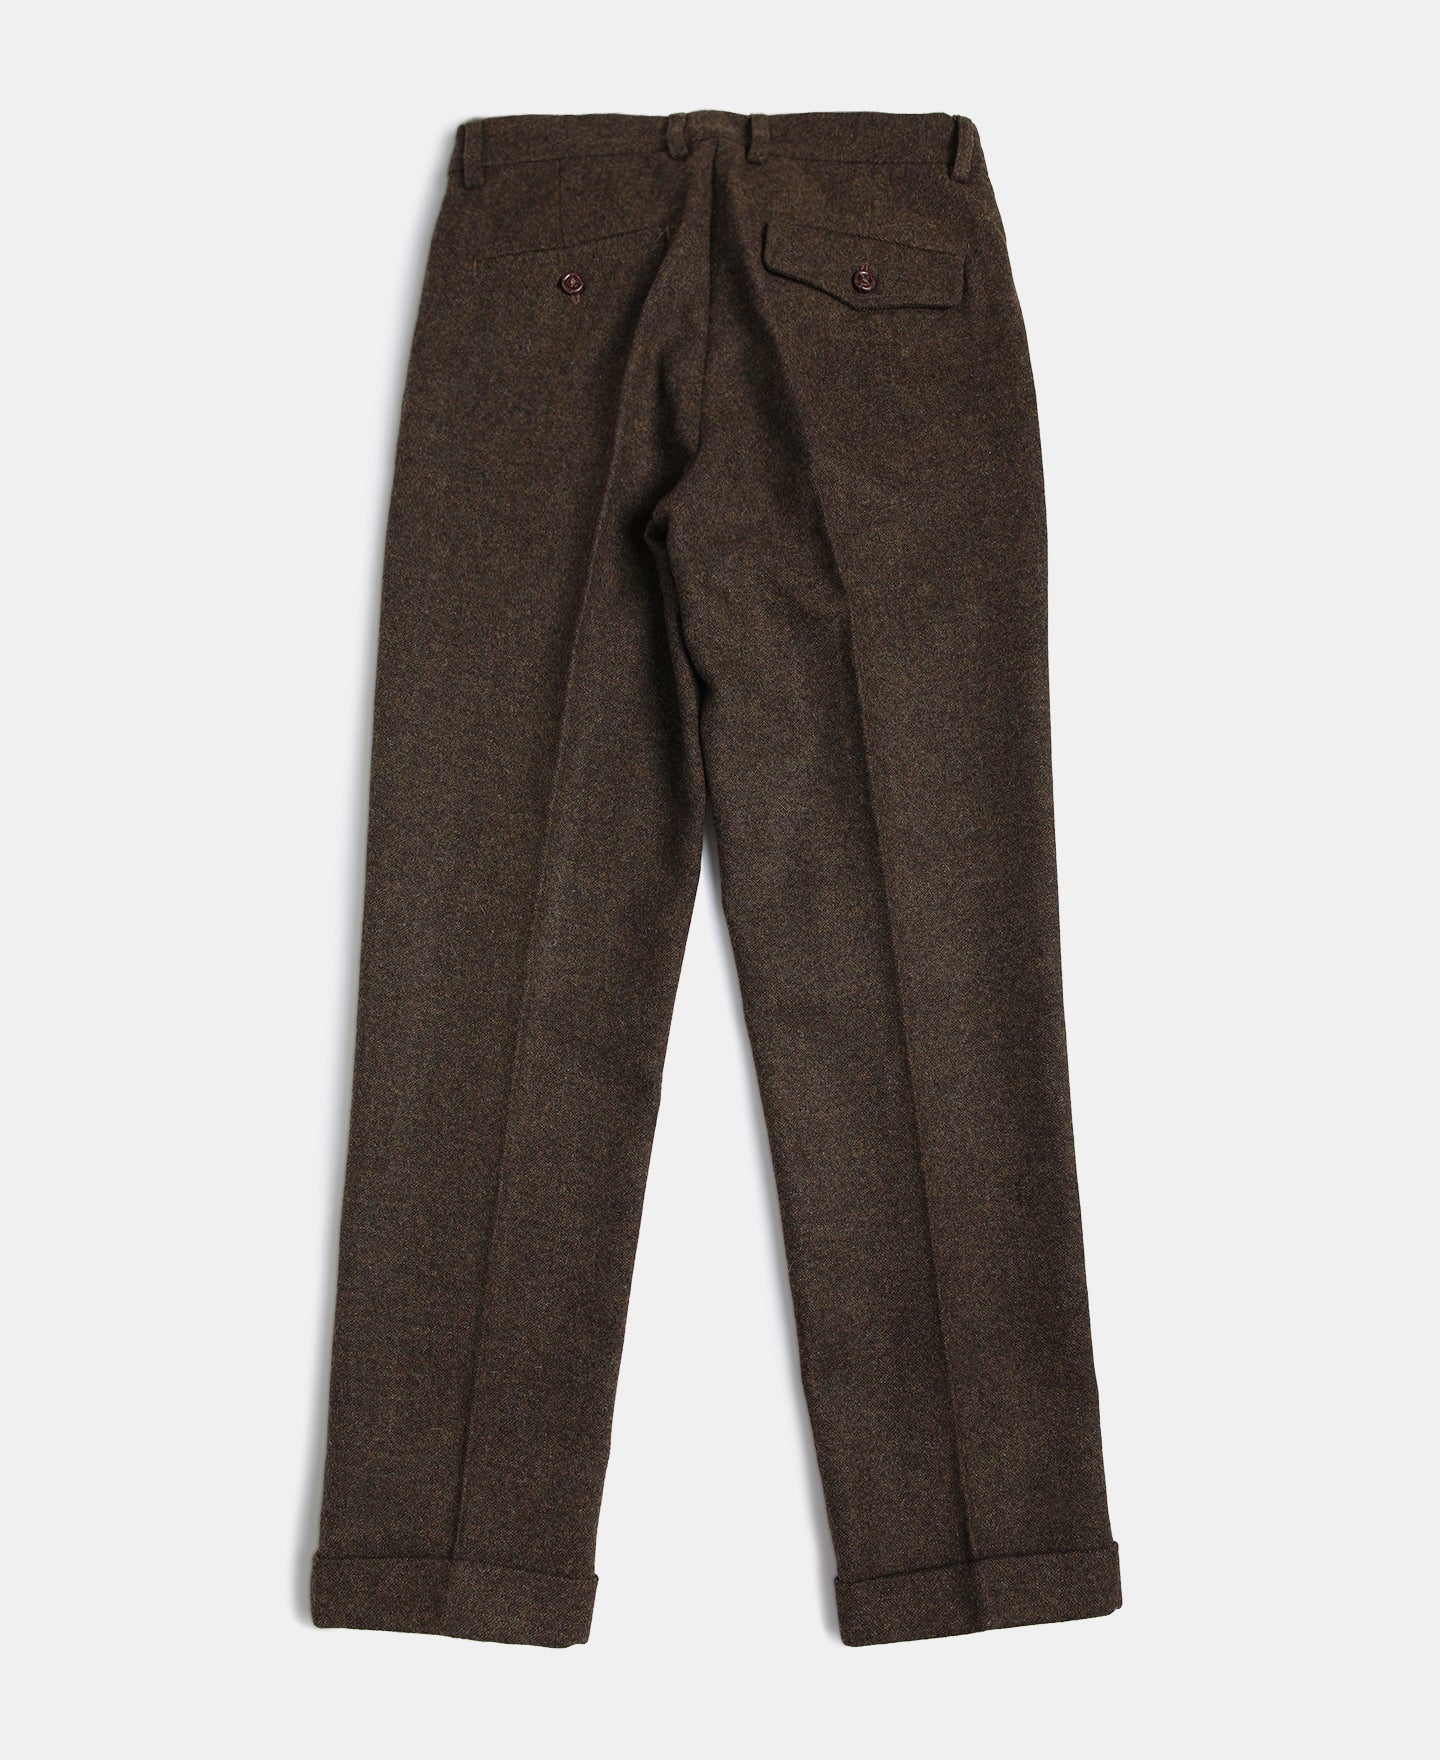 Pull On Tweed Trousers, Classic